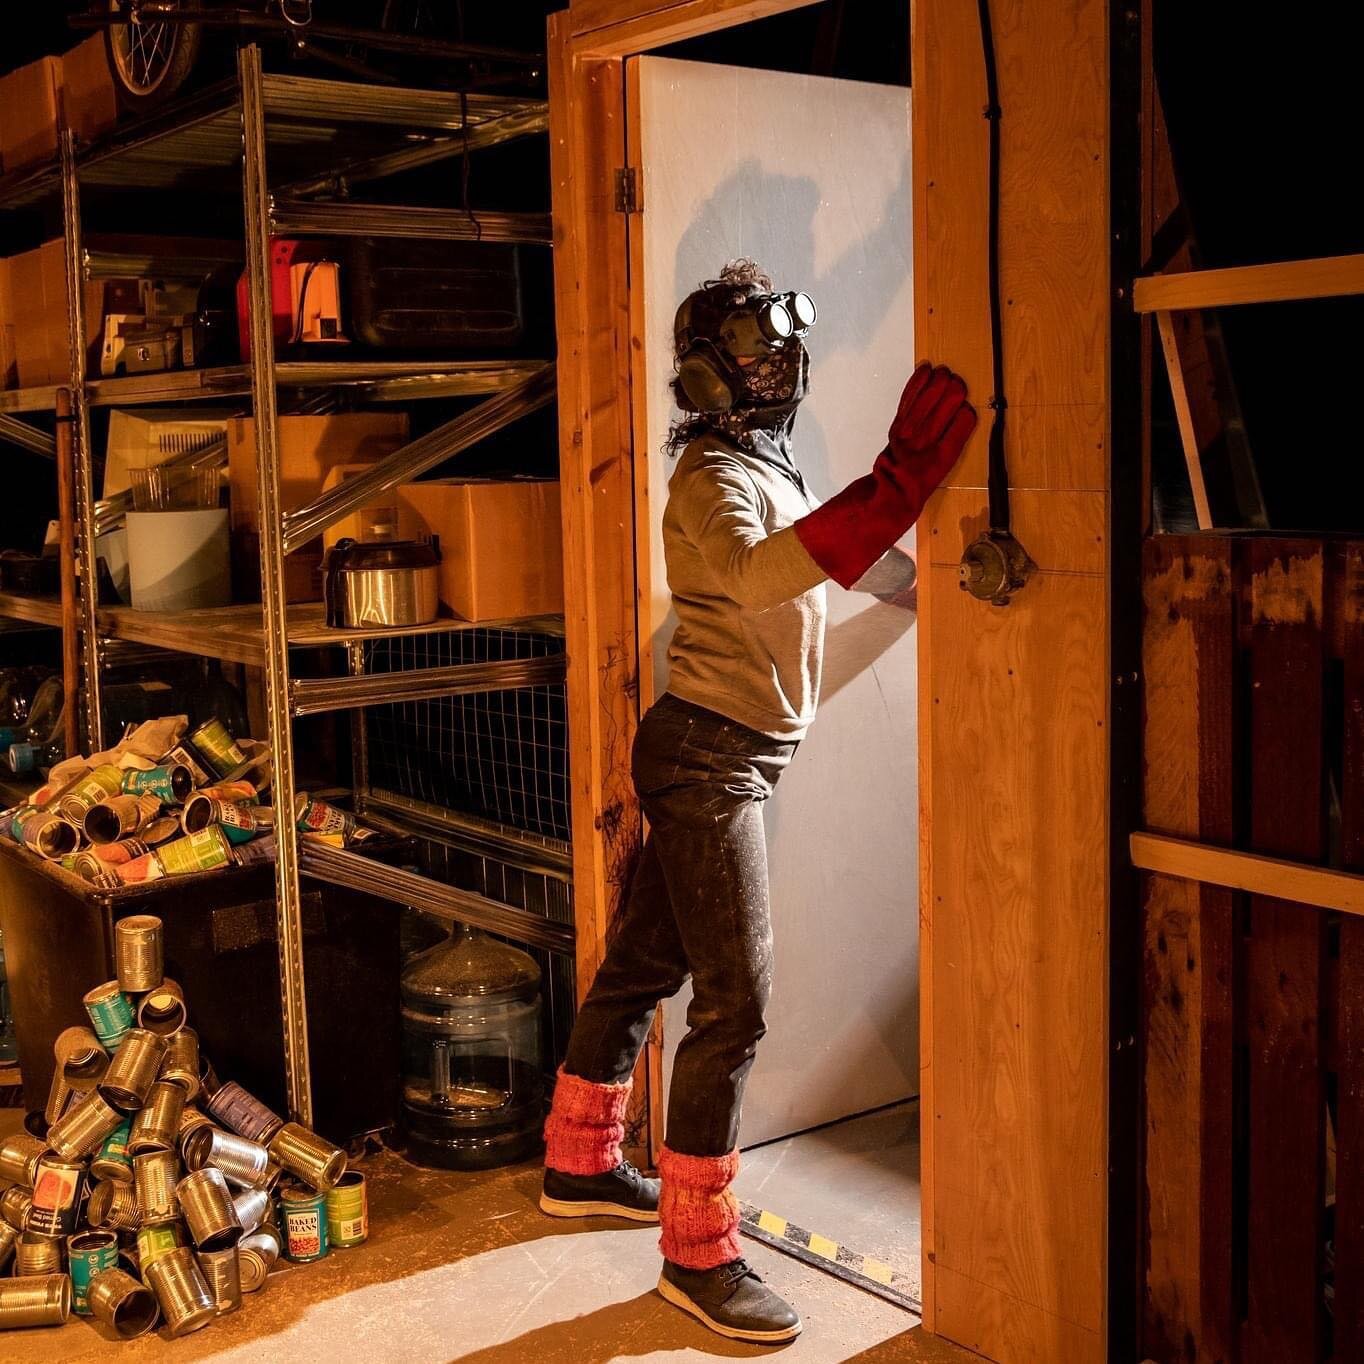 Burnt Out in Biscuitland by Touretteshero is on tour! This live experience blending live performance, film and conversation comes to the Key Theatre on 14th and 15th June. See what audiences have been saying about this exceptional, exciting experienc